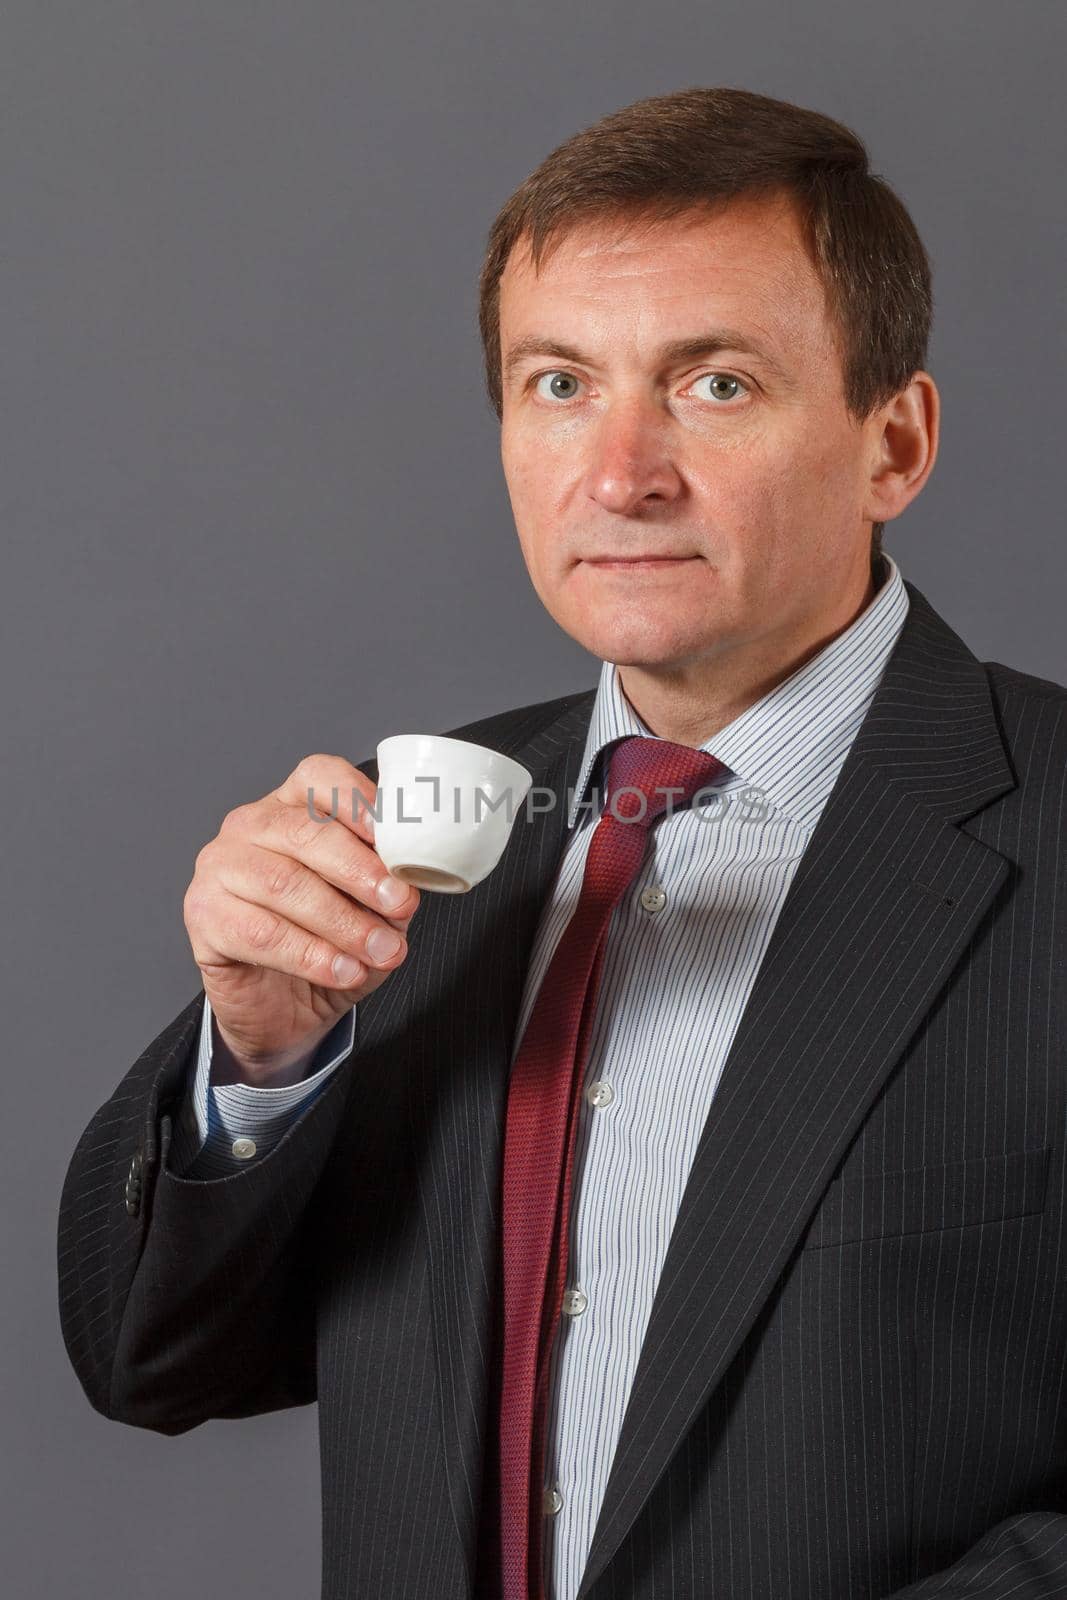 Confident and friendly elegant handsome mature businessman standing in front of a gray background in a studio taking a cup of coffee